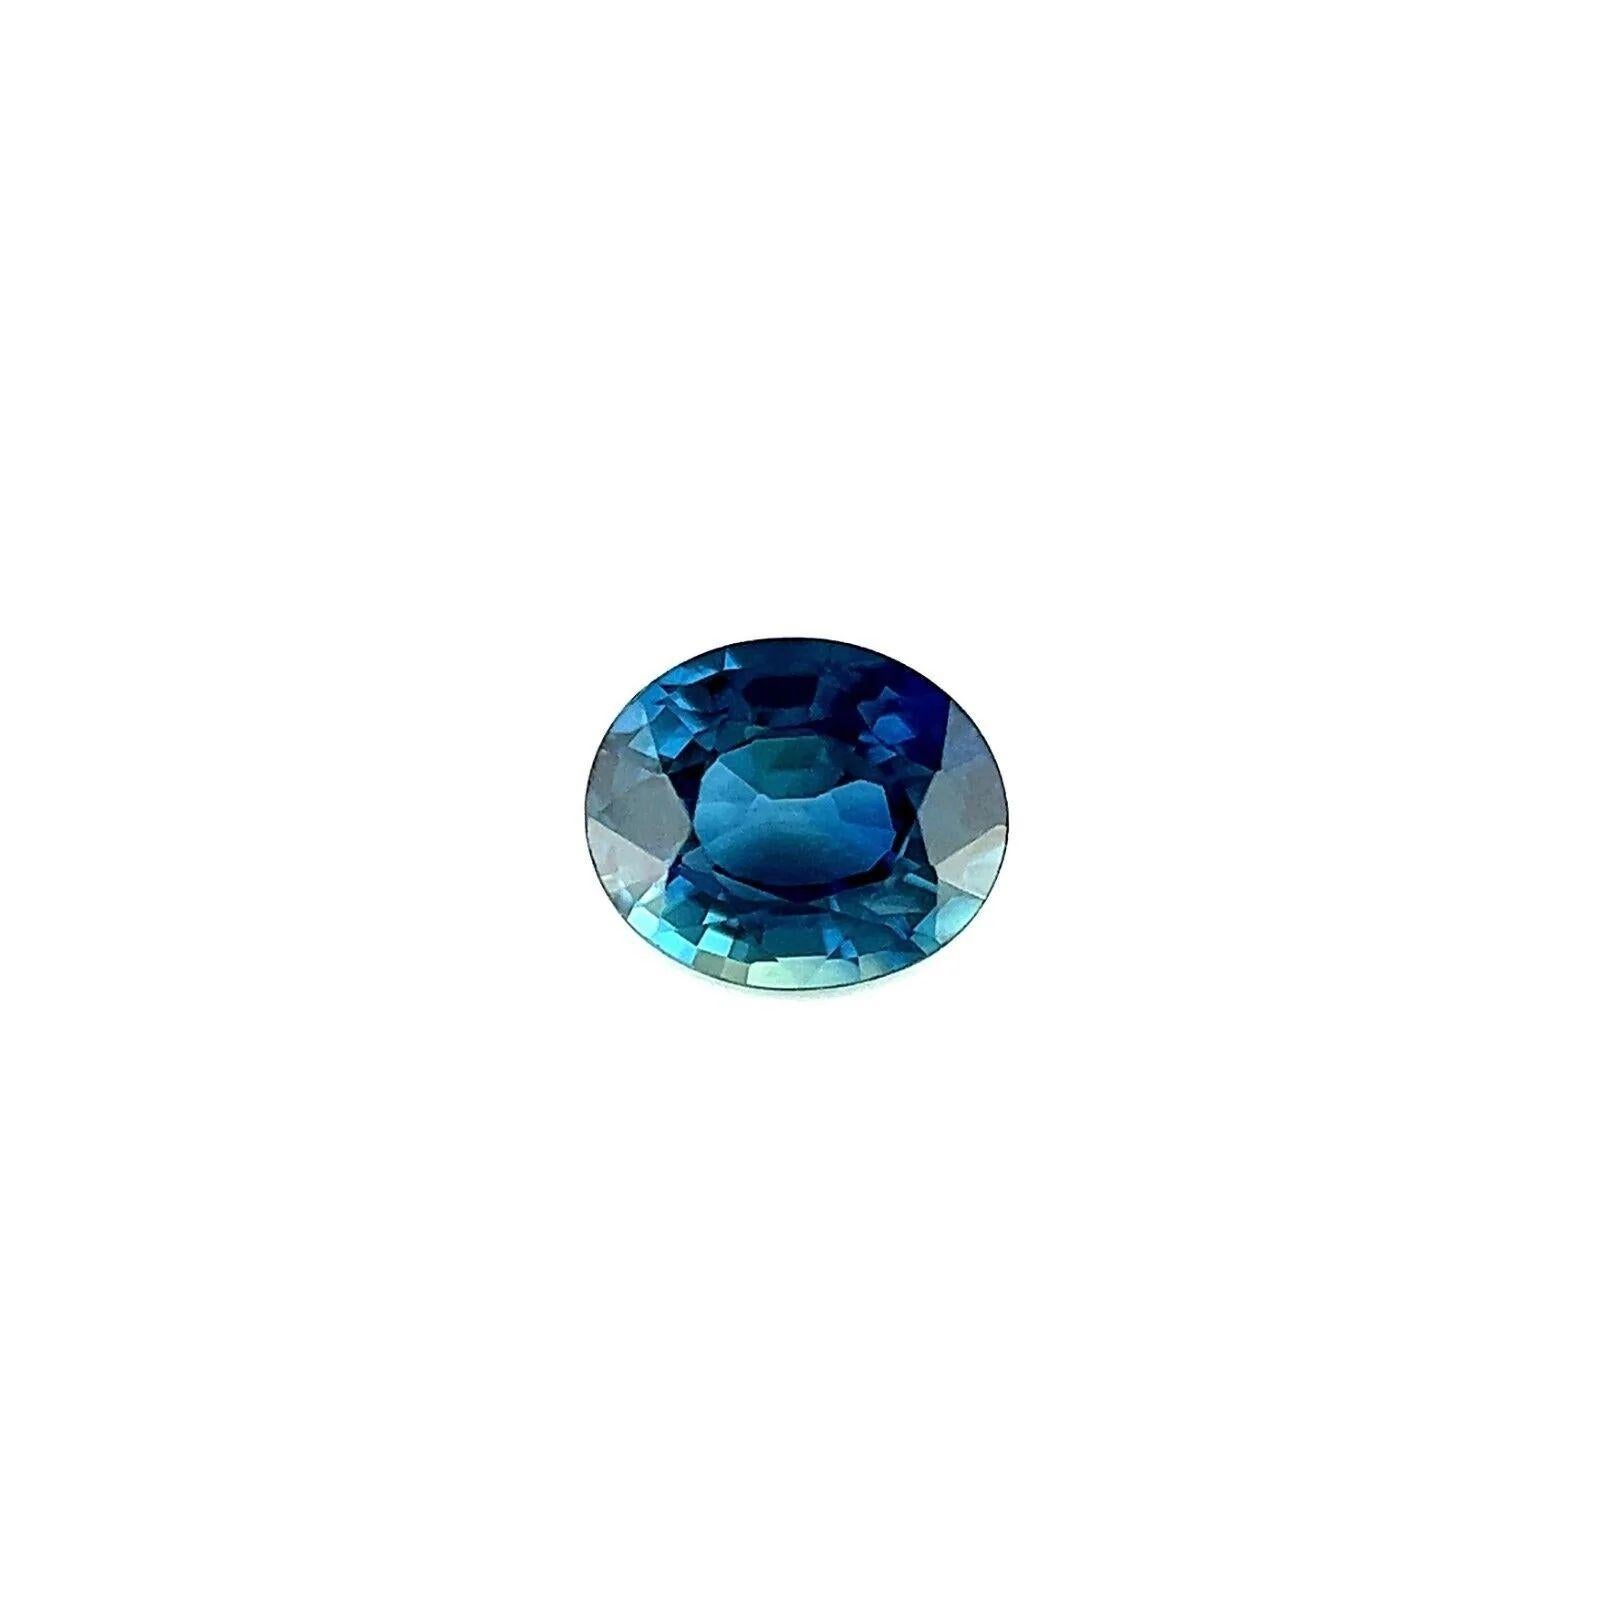 0.73ct Deep Blue Natural Sapphire Oval Loose Cut Gemstone 5.8x4.8mm VS

Natural Green Blue Sapphire Gemstone.
0.73 Carat with a beautiful deep blue colour and good clarity, a clean stone with only some small natural inclusions visible when looking